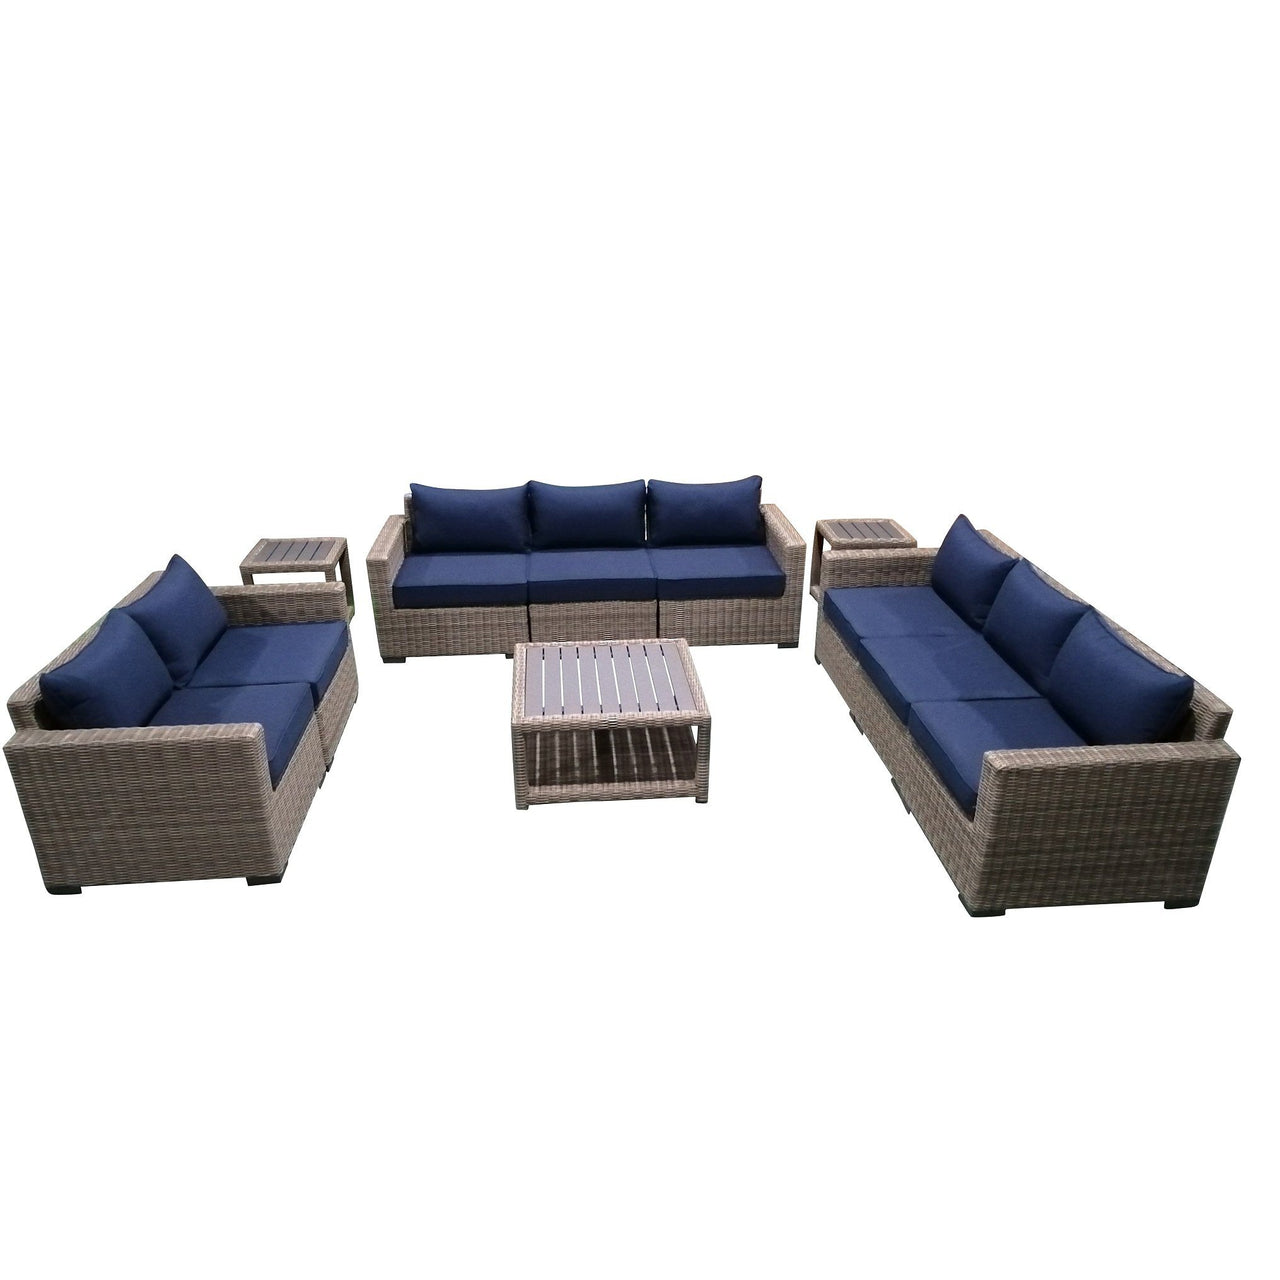 11-Piece Outdoor Pation Funiture Set Wicker Rattan Sectional Sofa Couch with Coffee Table and Side Table Outdoor Furniture Casual Inc. 